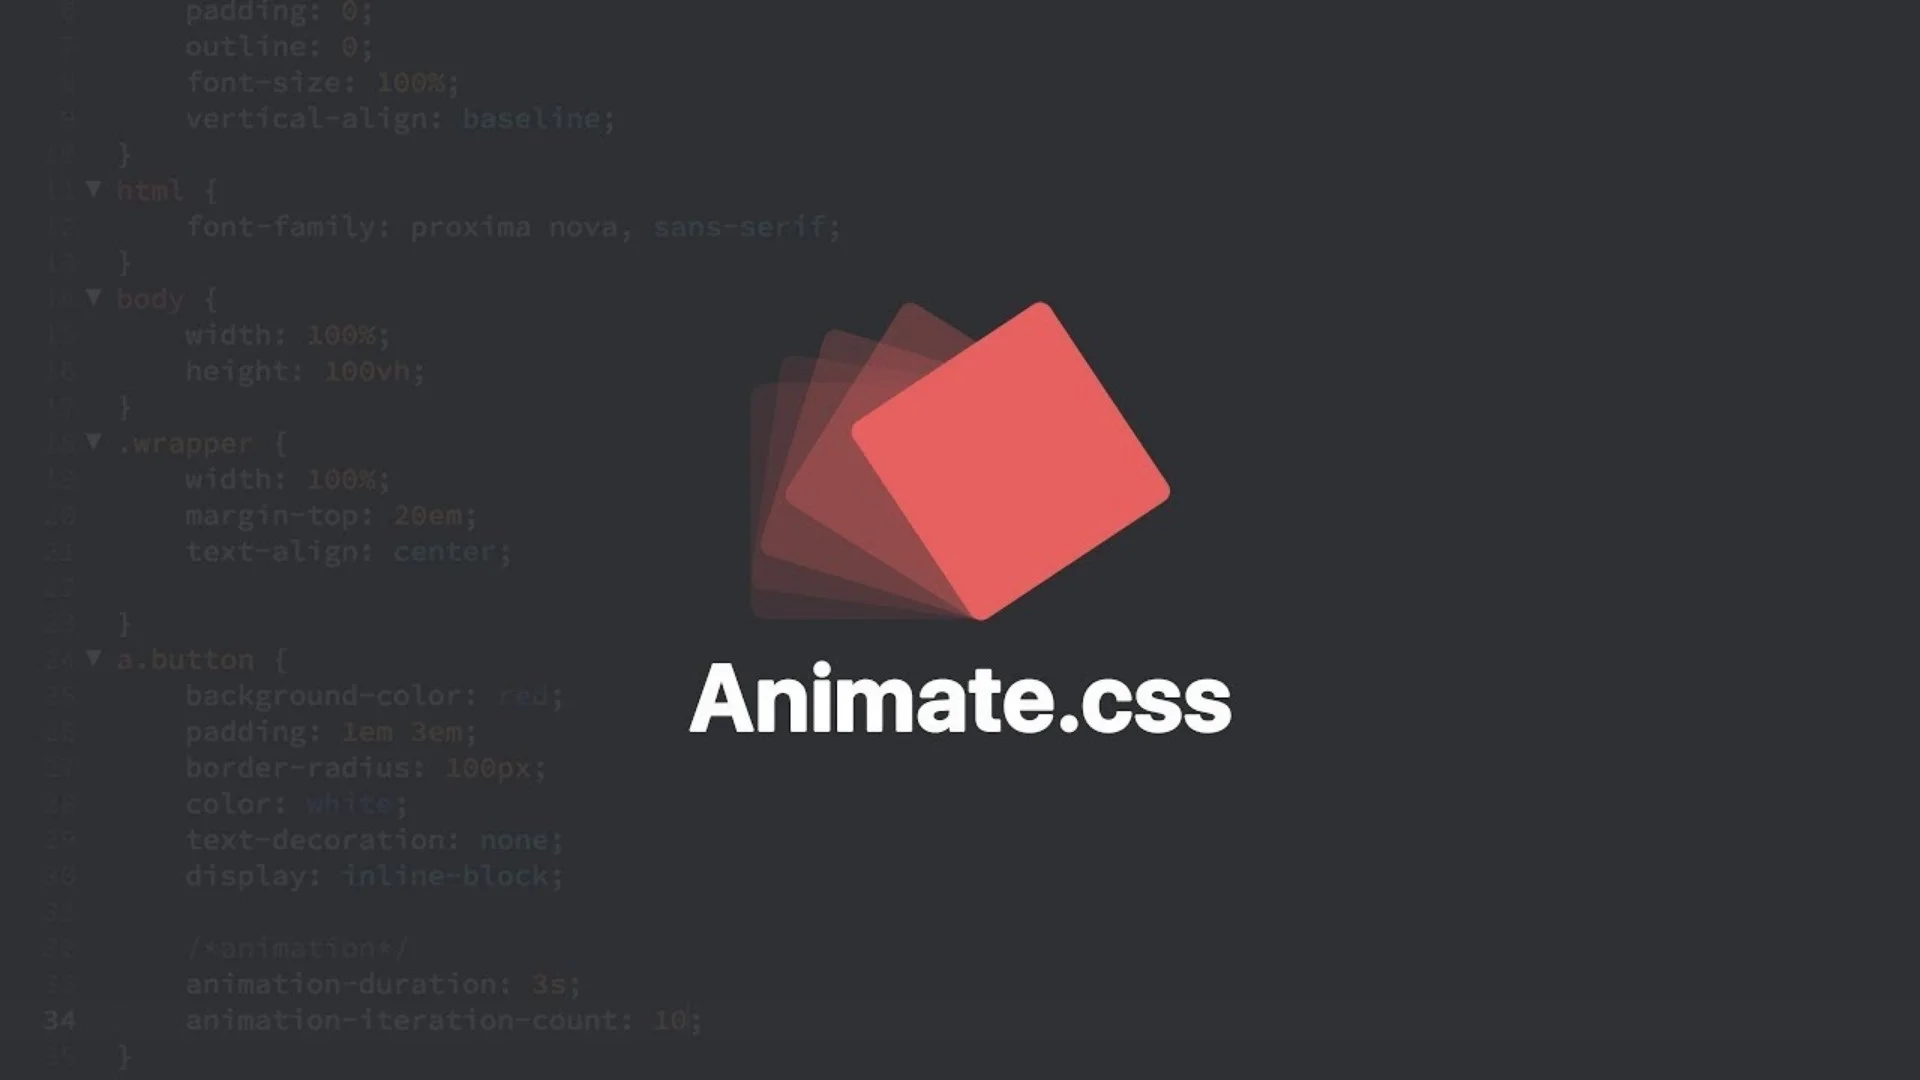 Animation CSS is a complex concept in simple words